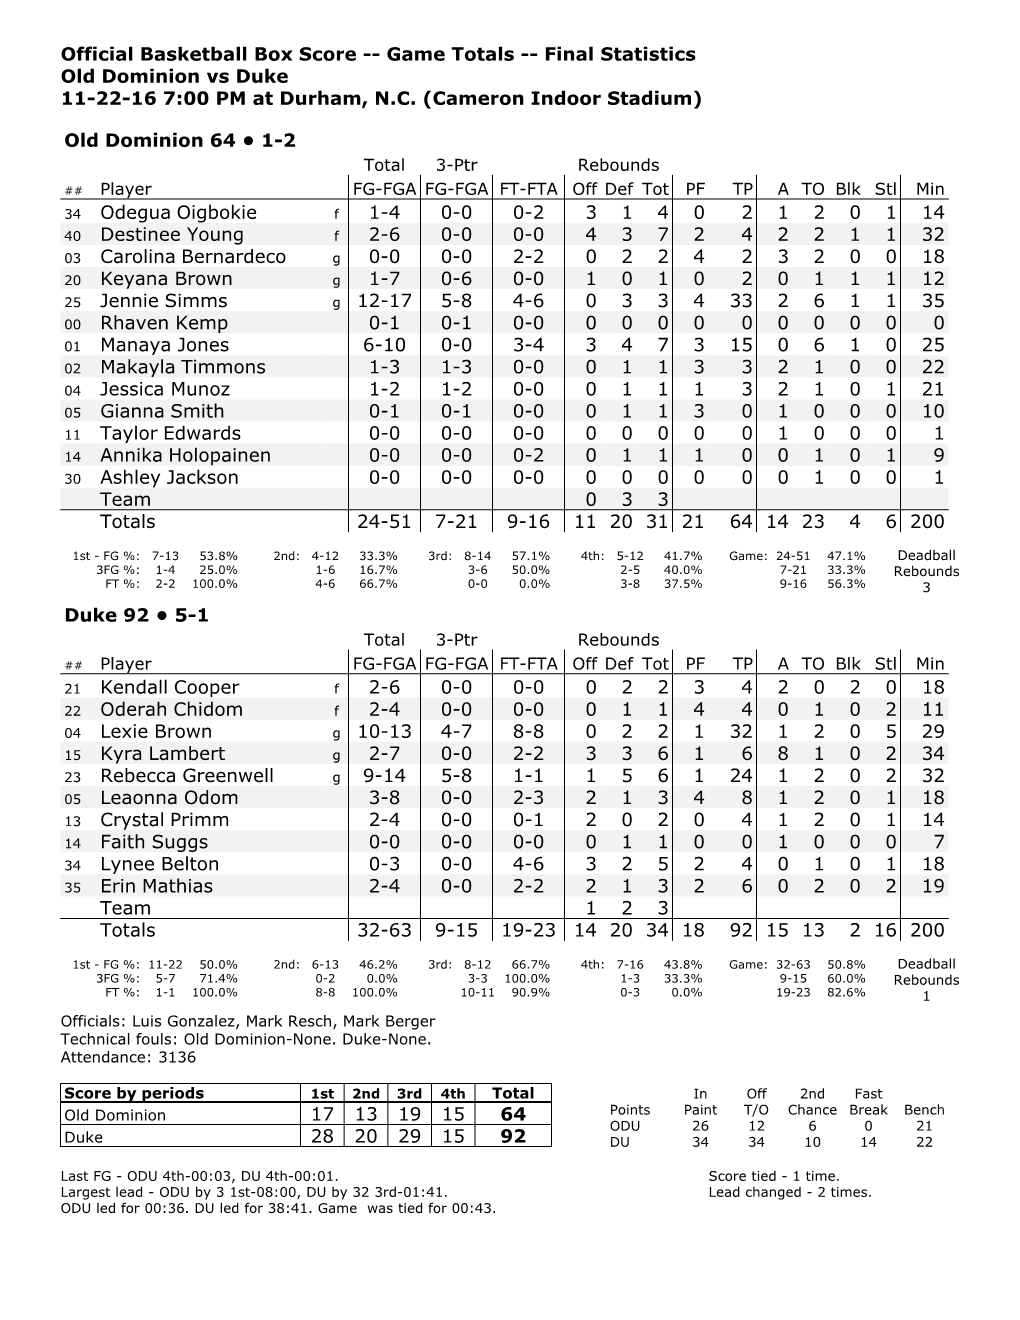 Official Basketball Box Score -- Game Totals -- Final Statistics Old Dominion Vs Duke 11-22-16 7:00 PM at Durham, N.C